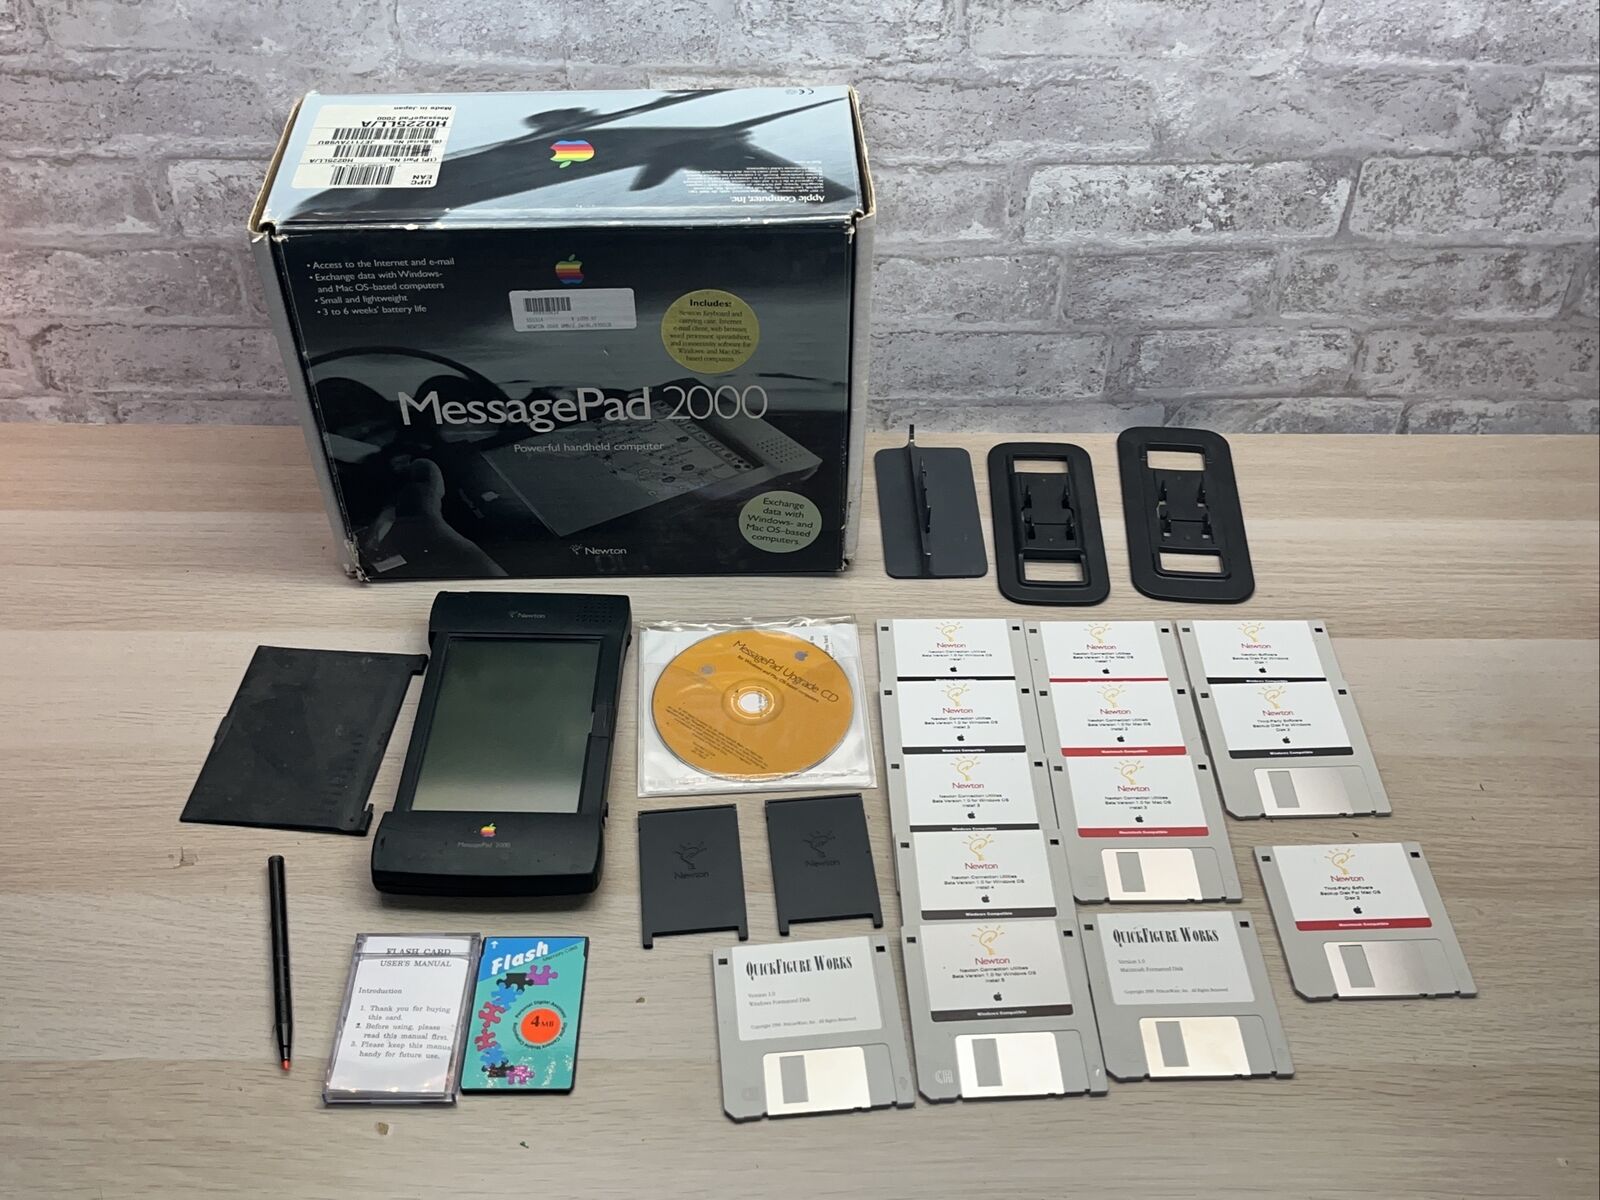 Vintage Apple Newton MessagePad 2000 With Original Box and Some Accessories